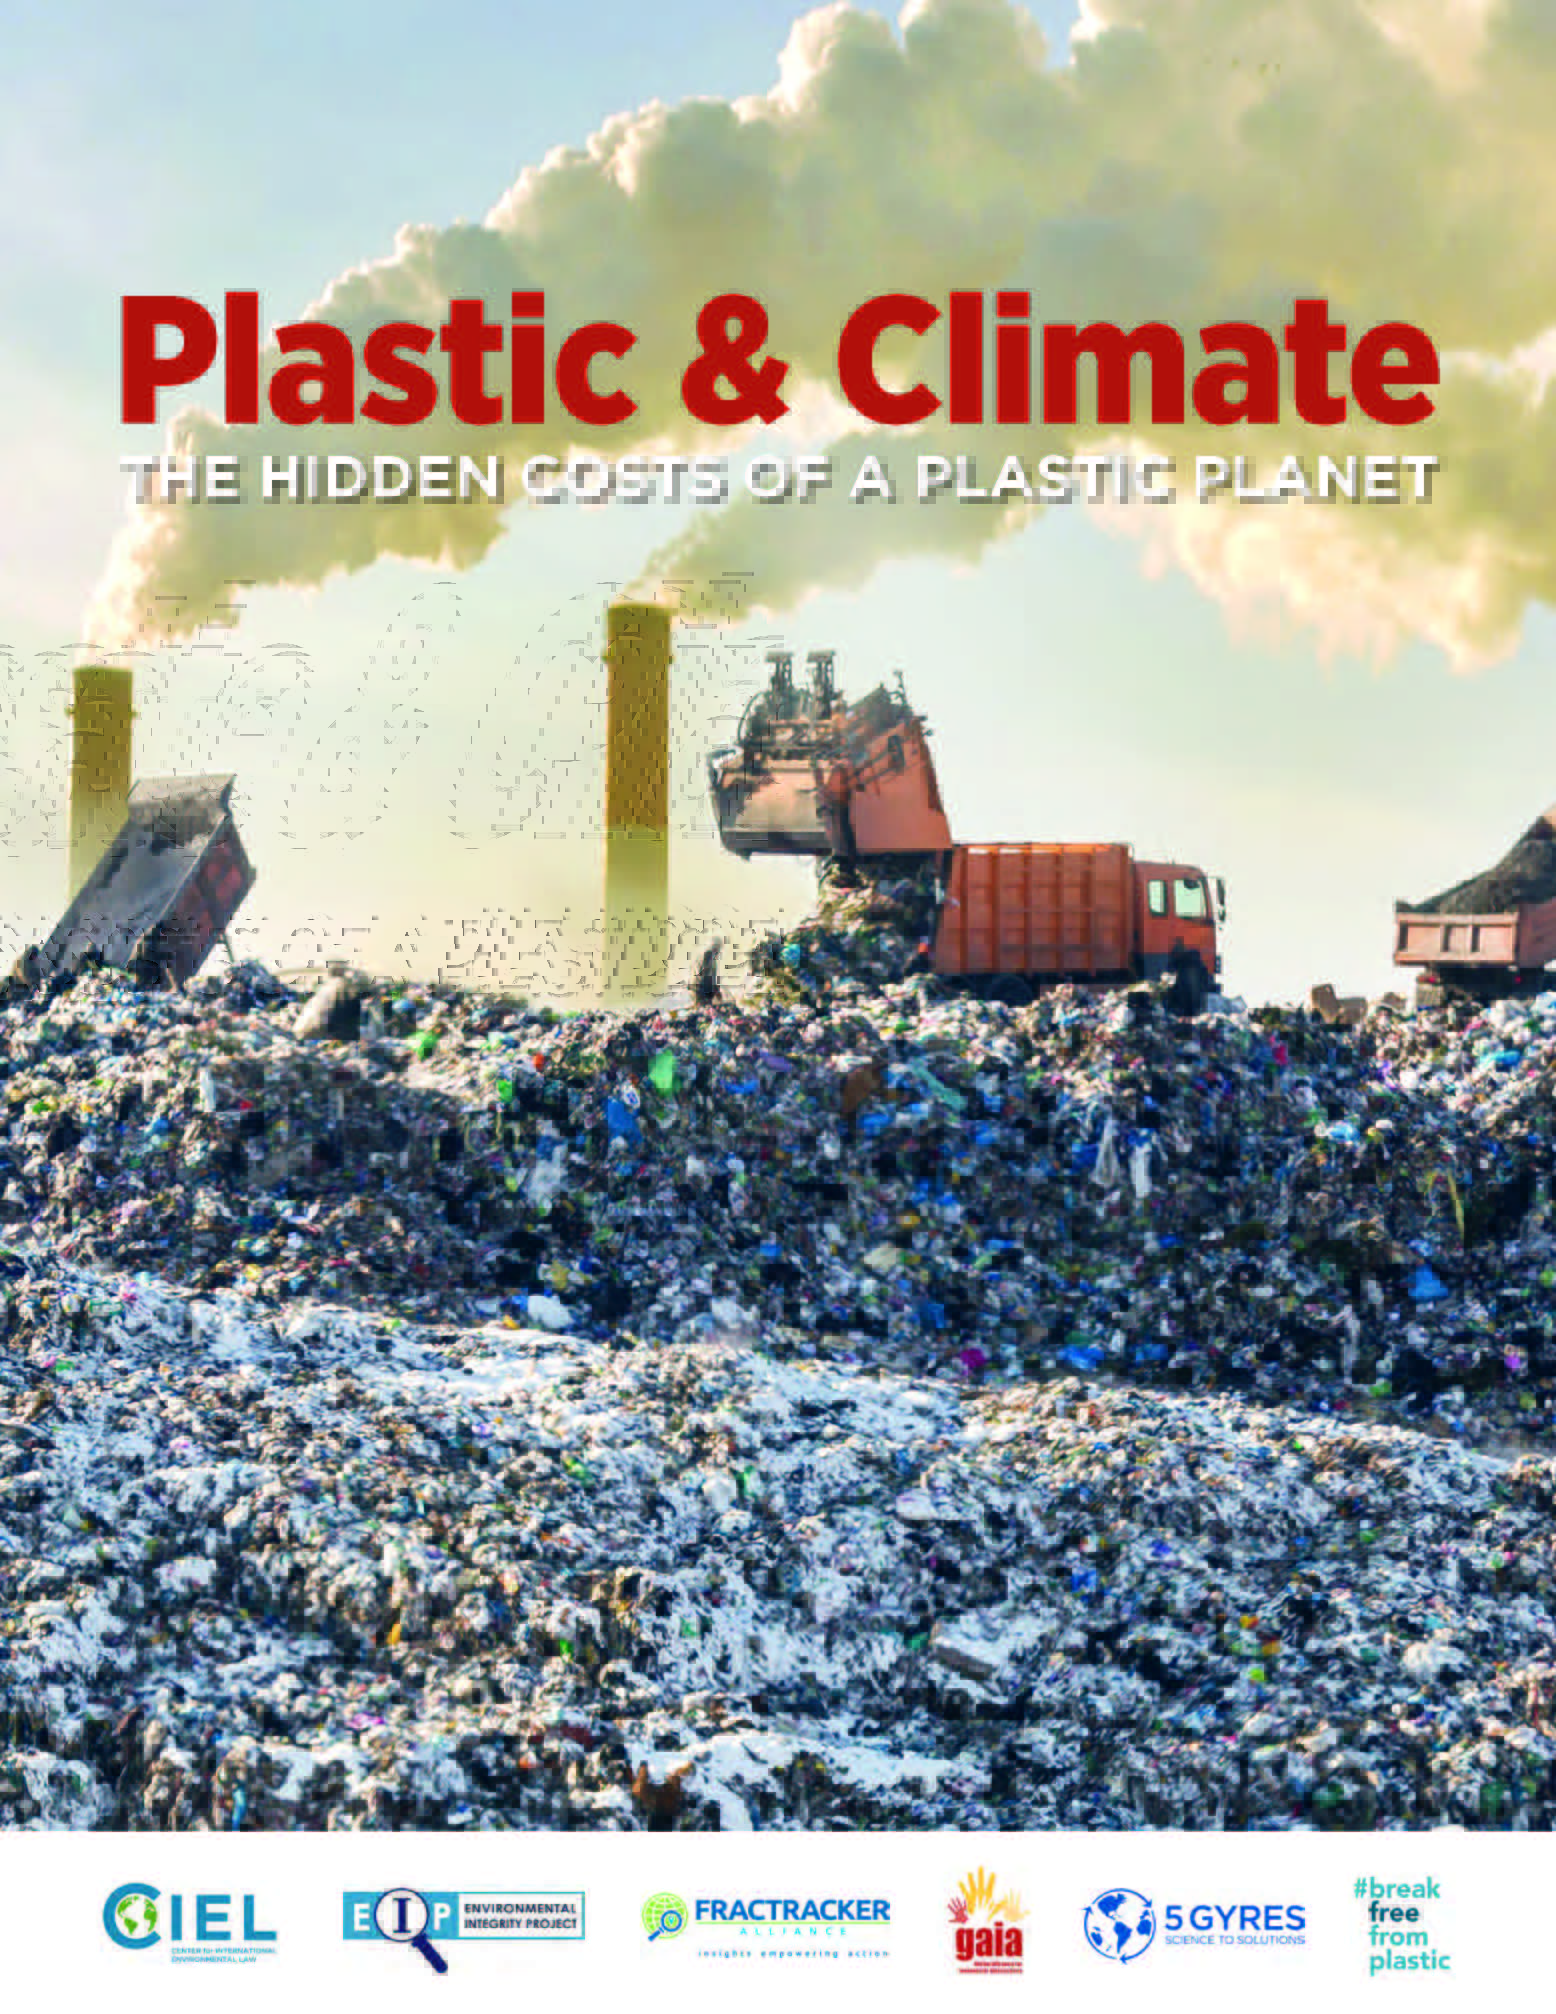 https://www.ciel.org/wp-content/uploads/2019/05/Cover-Image-Plastic-and-Climate-FINAL.jpg